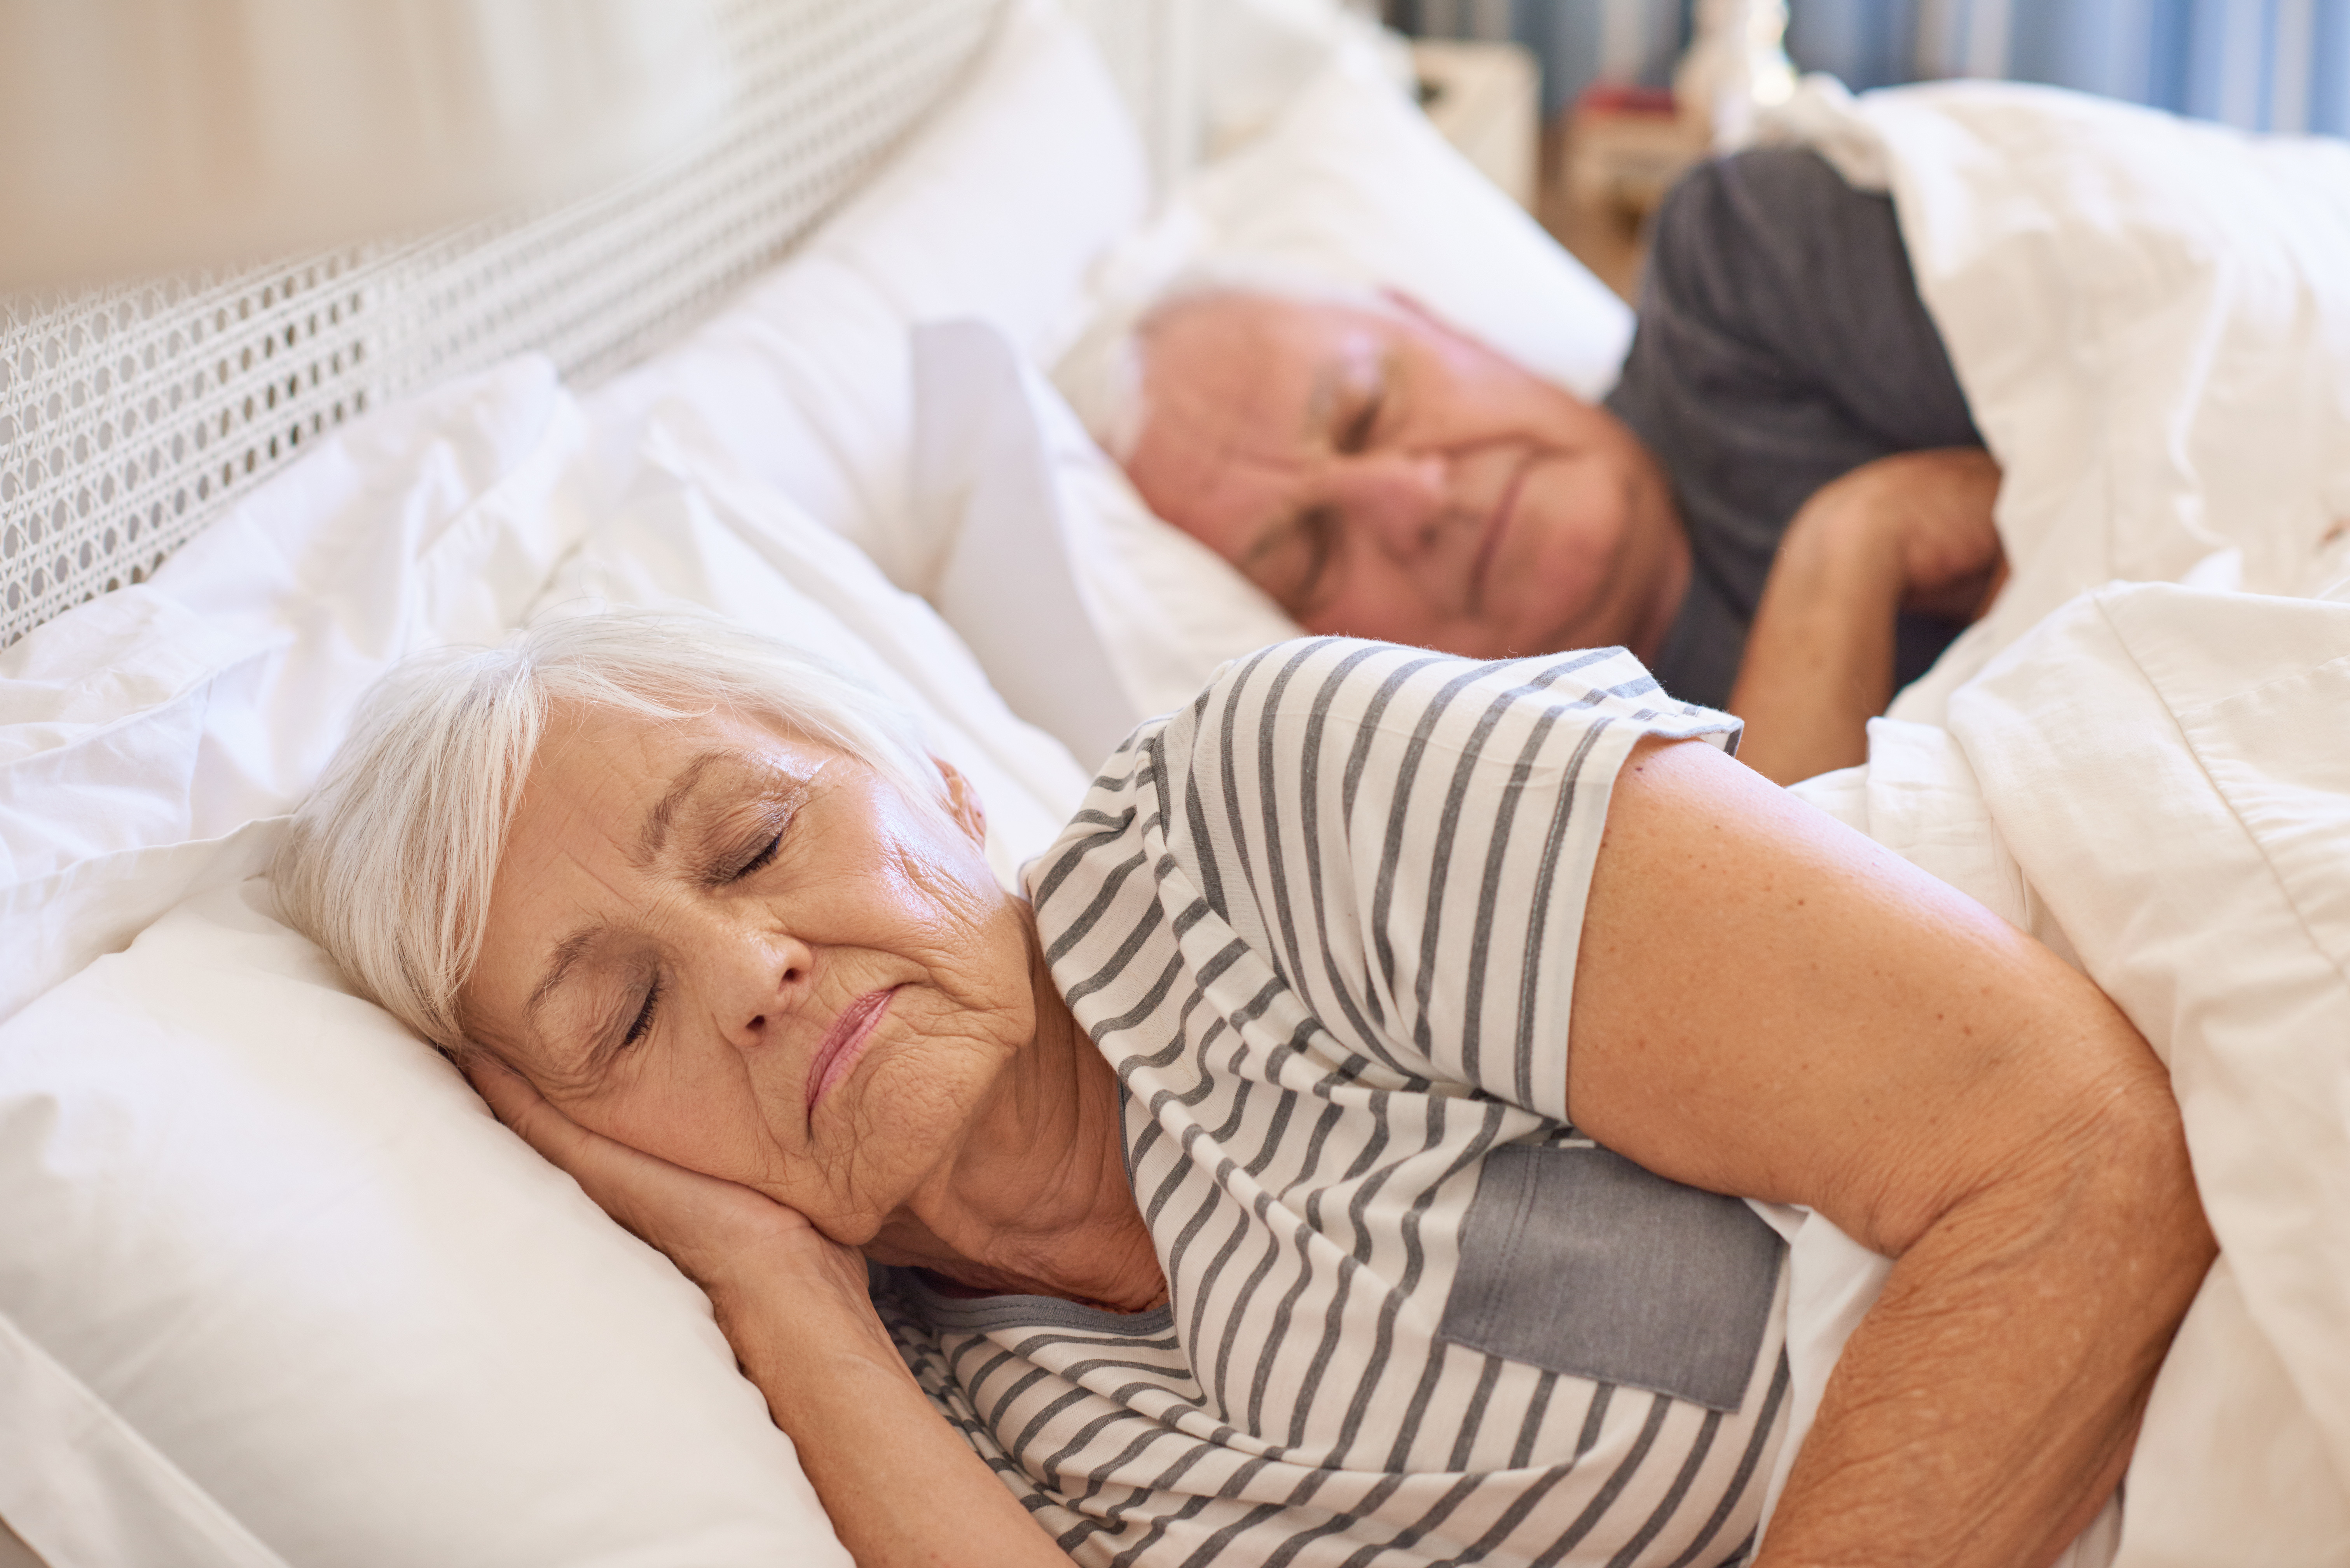 Sleeping pills and older people: the risks | NPS MedicineWise